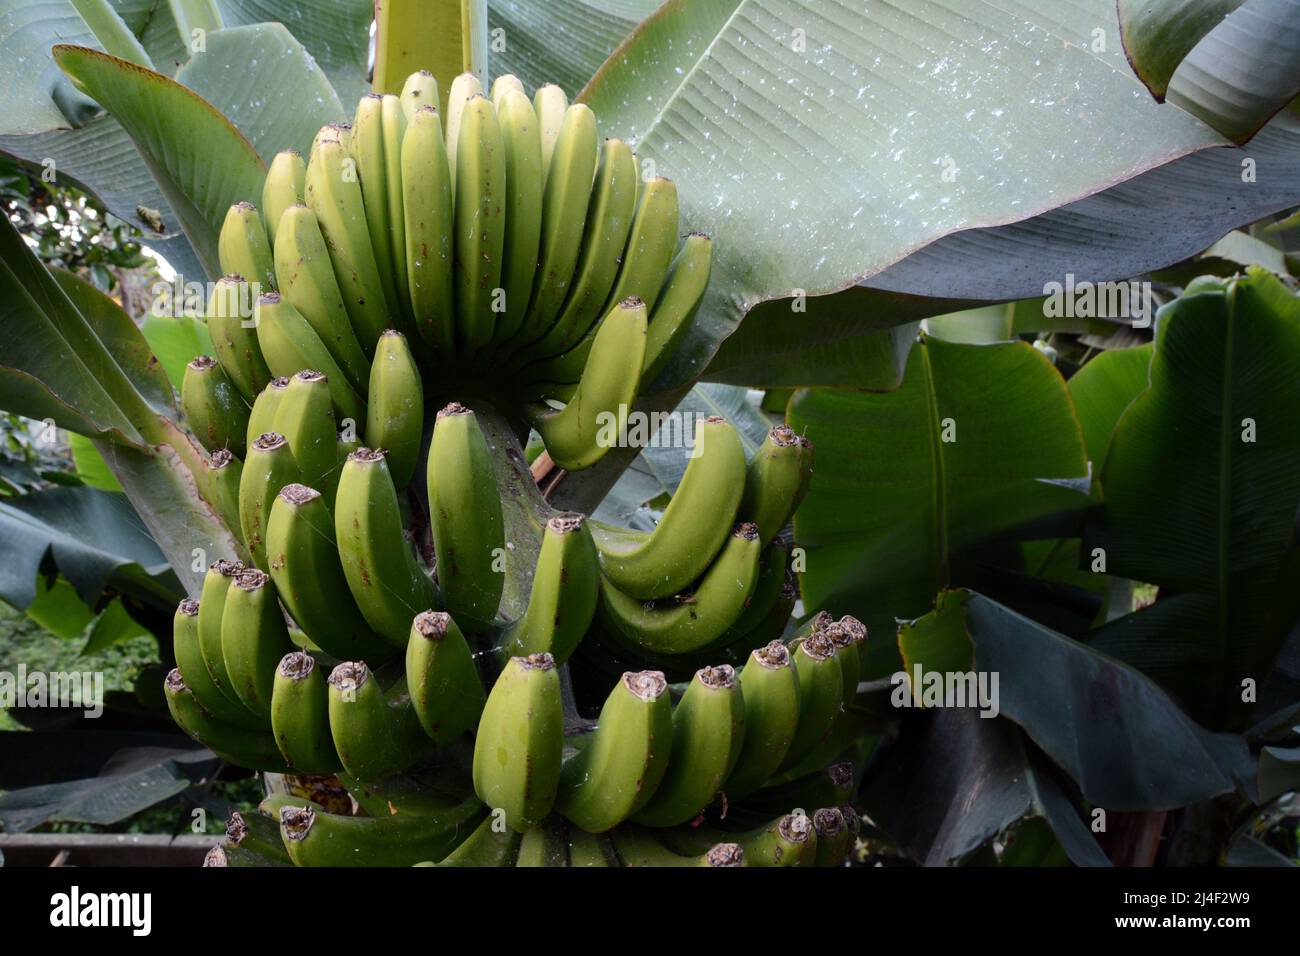 A bunch of unripe Canarian bananas growing on tree on a farm, or finca, in the area of Los Realejos, on the island of Tenerife, Canary Islands, Spain. Stock Photo